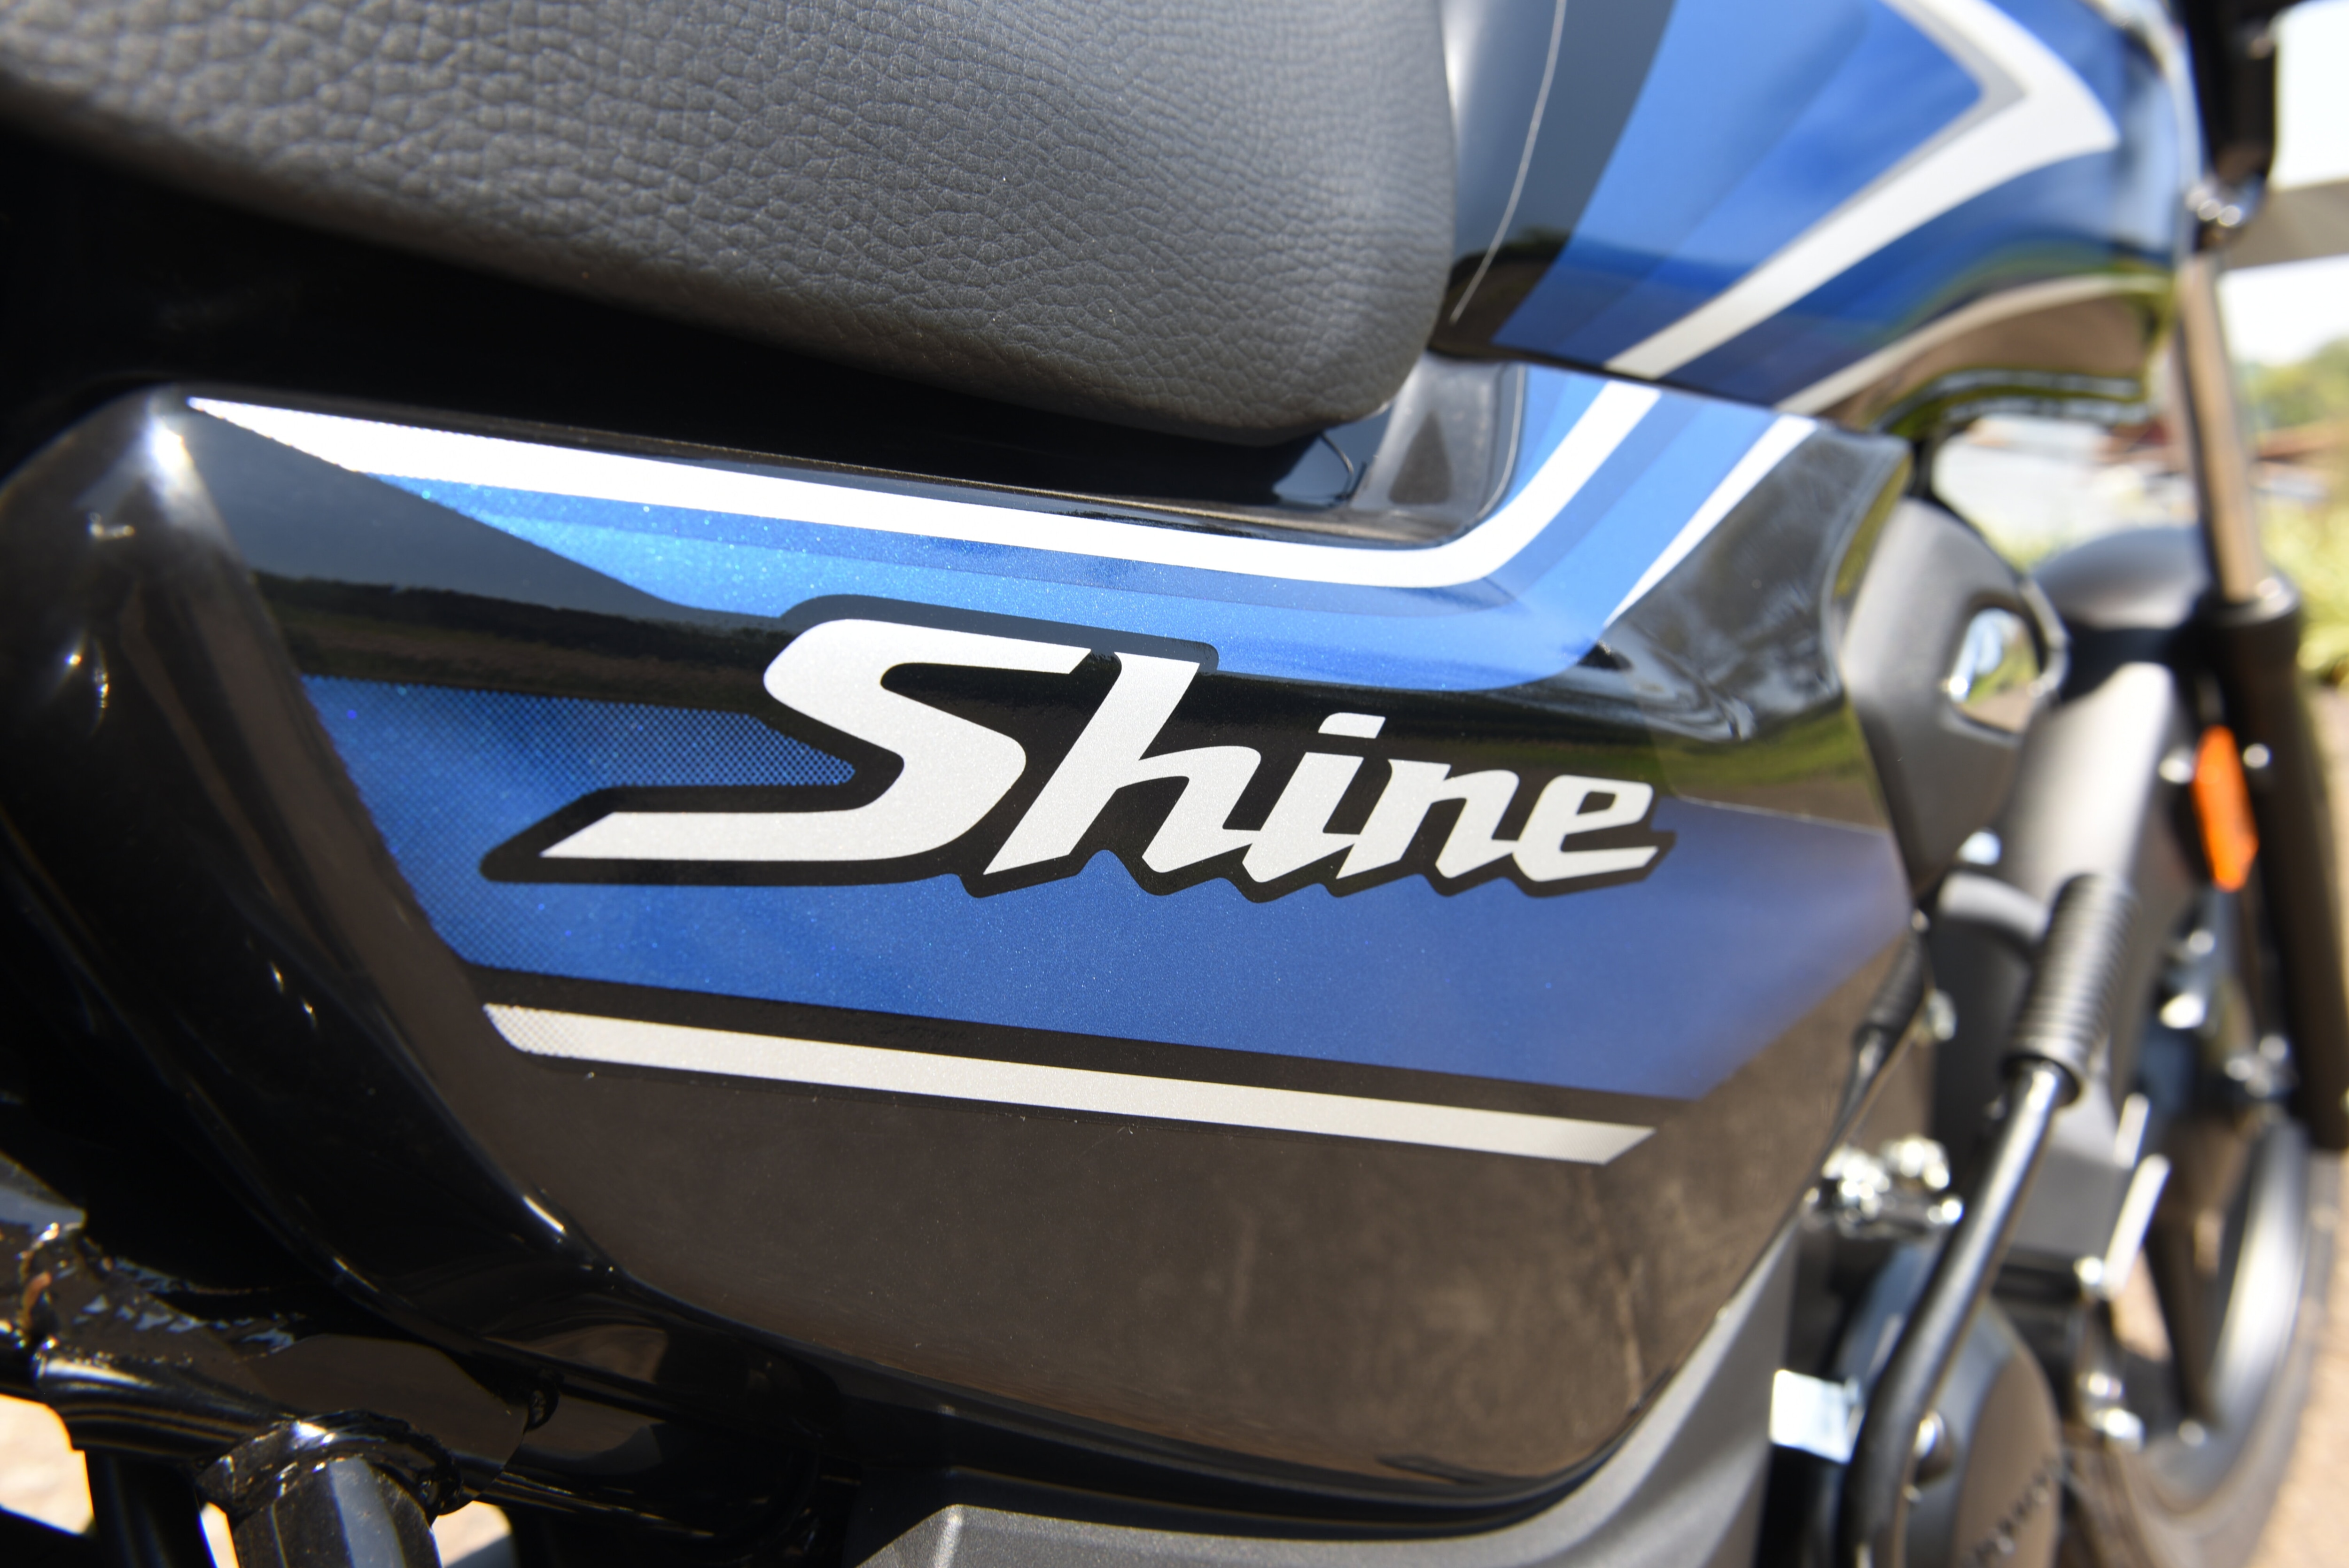 Honda has not disclosed the official fuel efficiency figures on the Shine 100